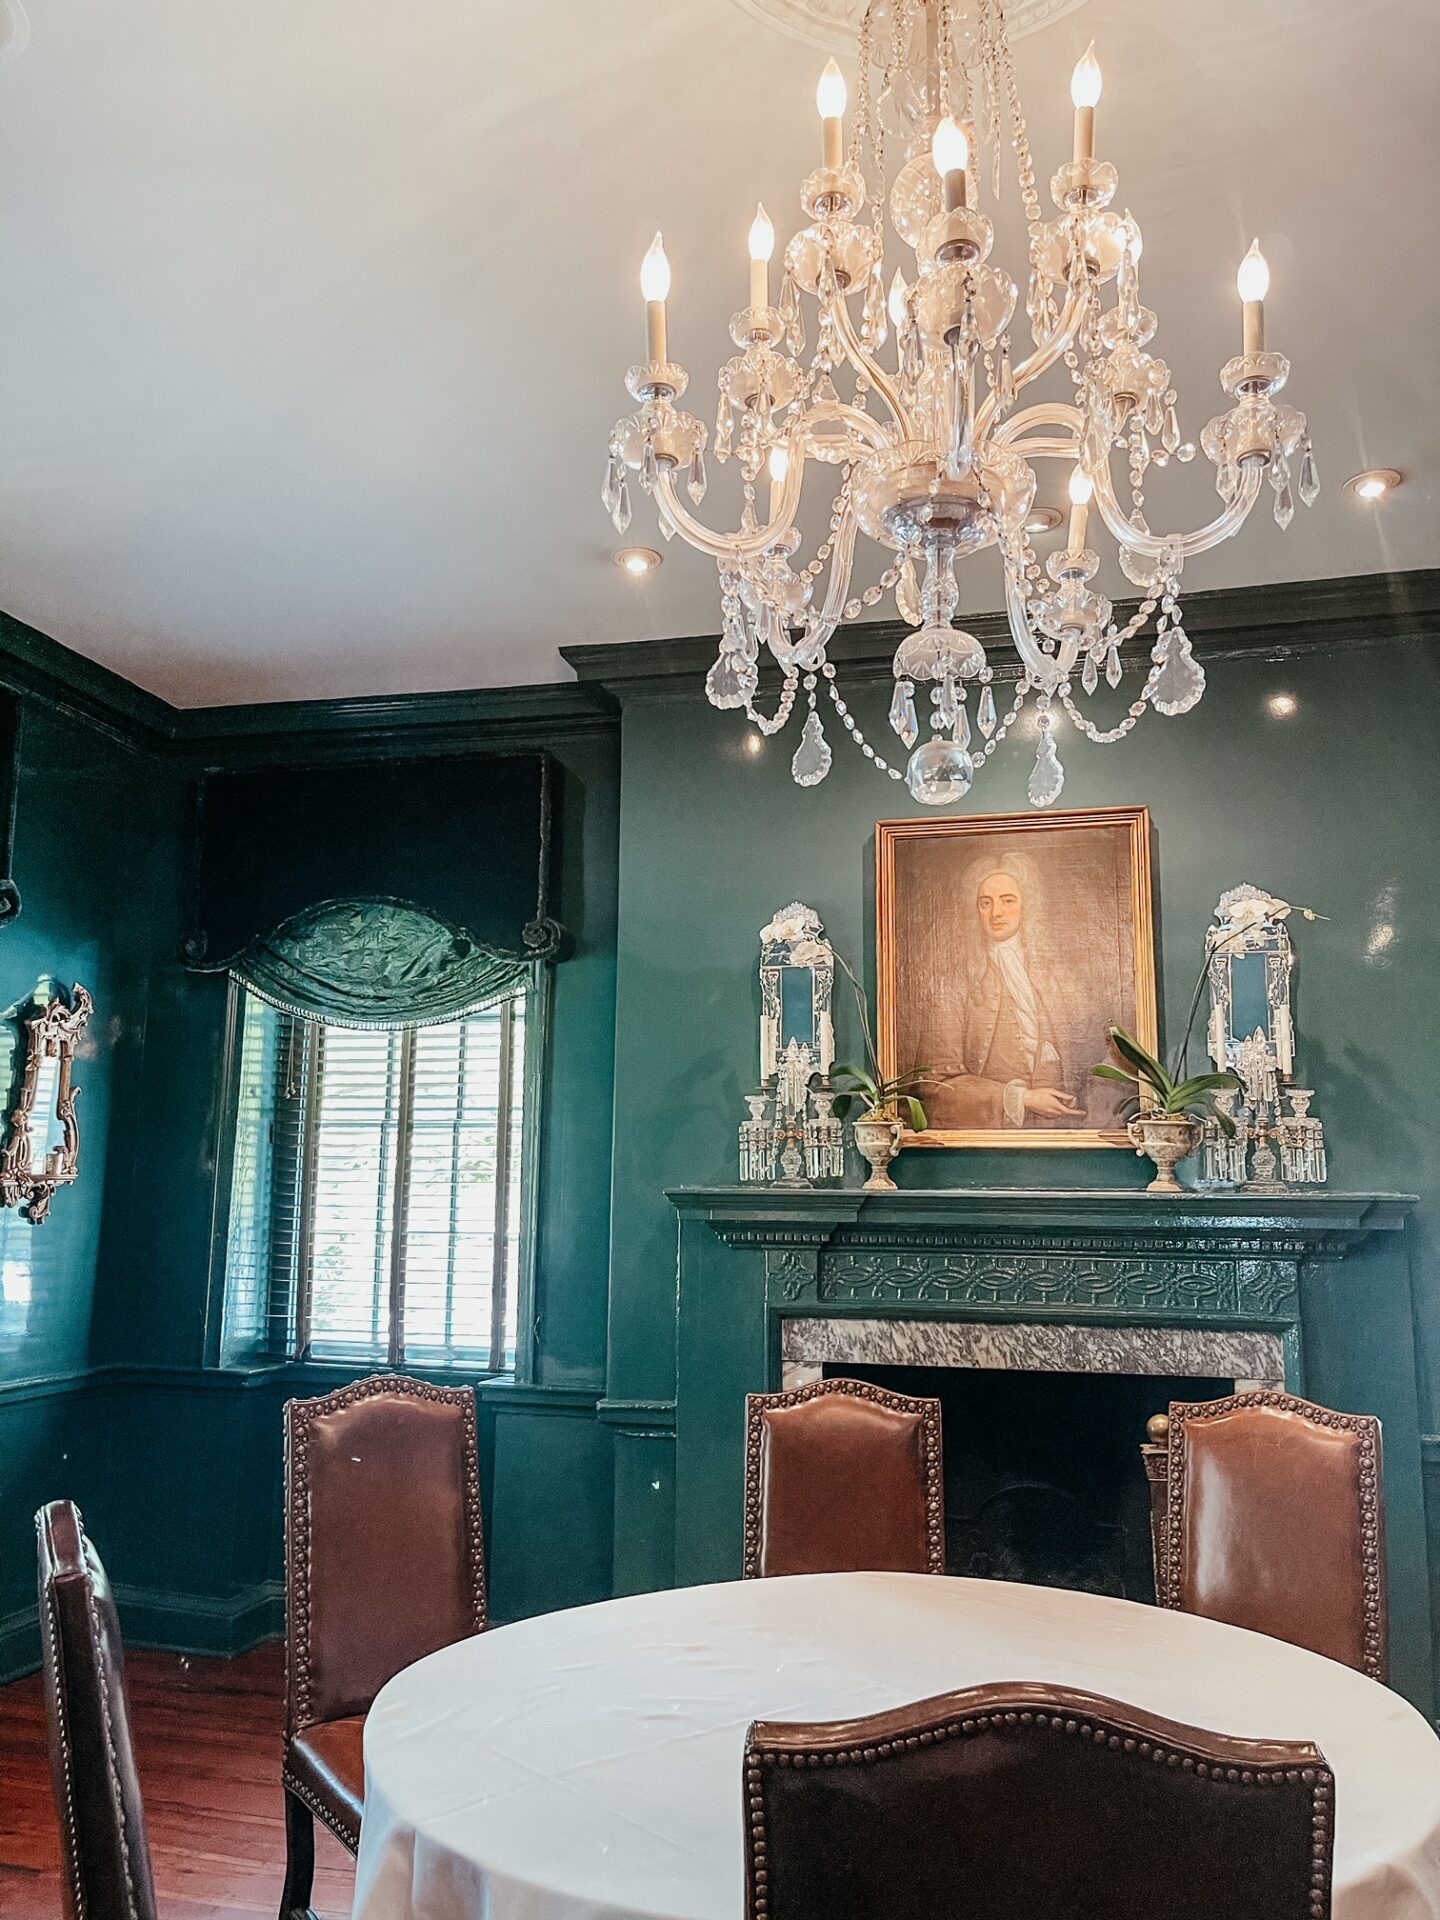 Girls Getaway by popular Nashville travel blog, Hello Happiness: image of room with green walls, green drapes, marble fireplace, and round table with leather chairs. 